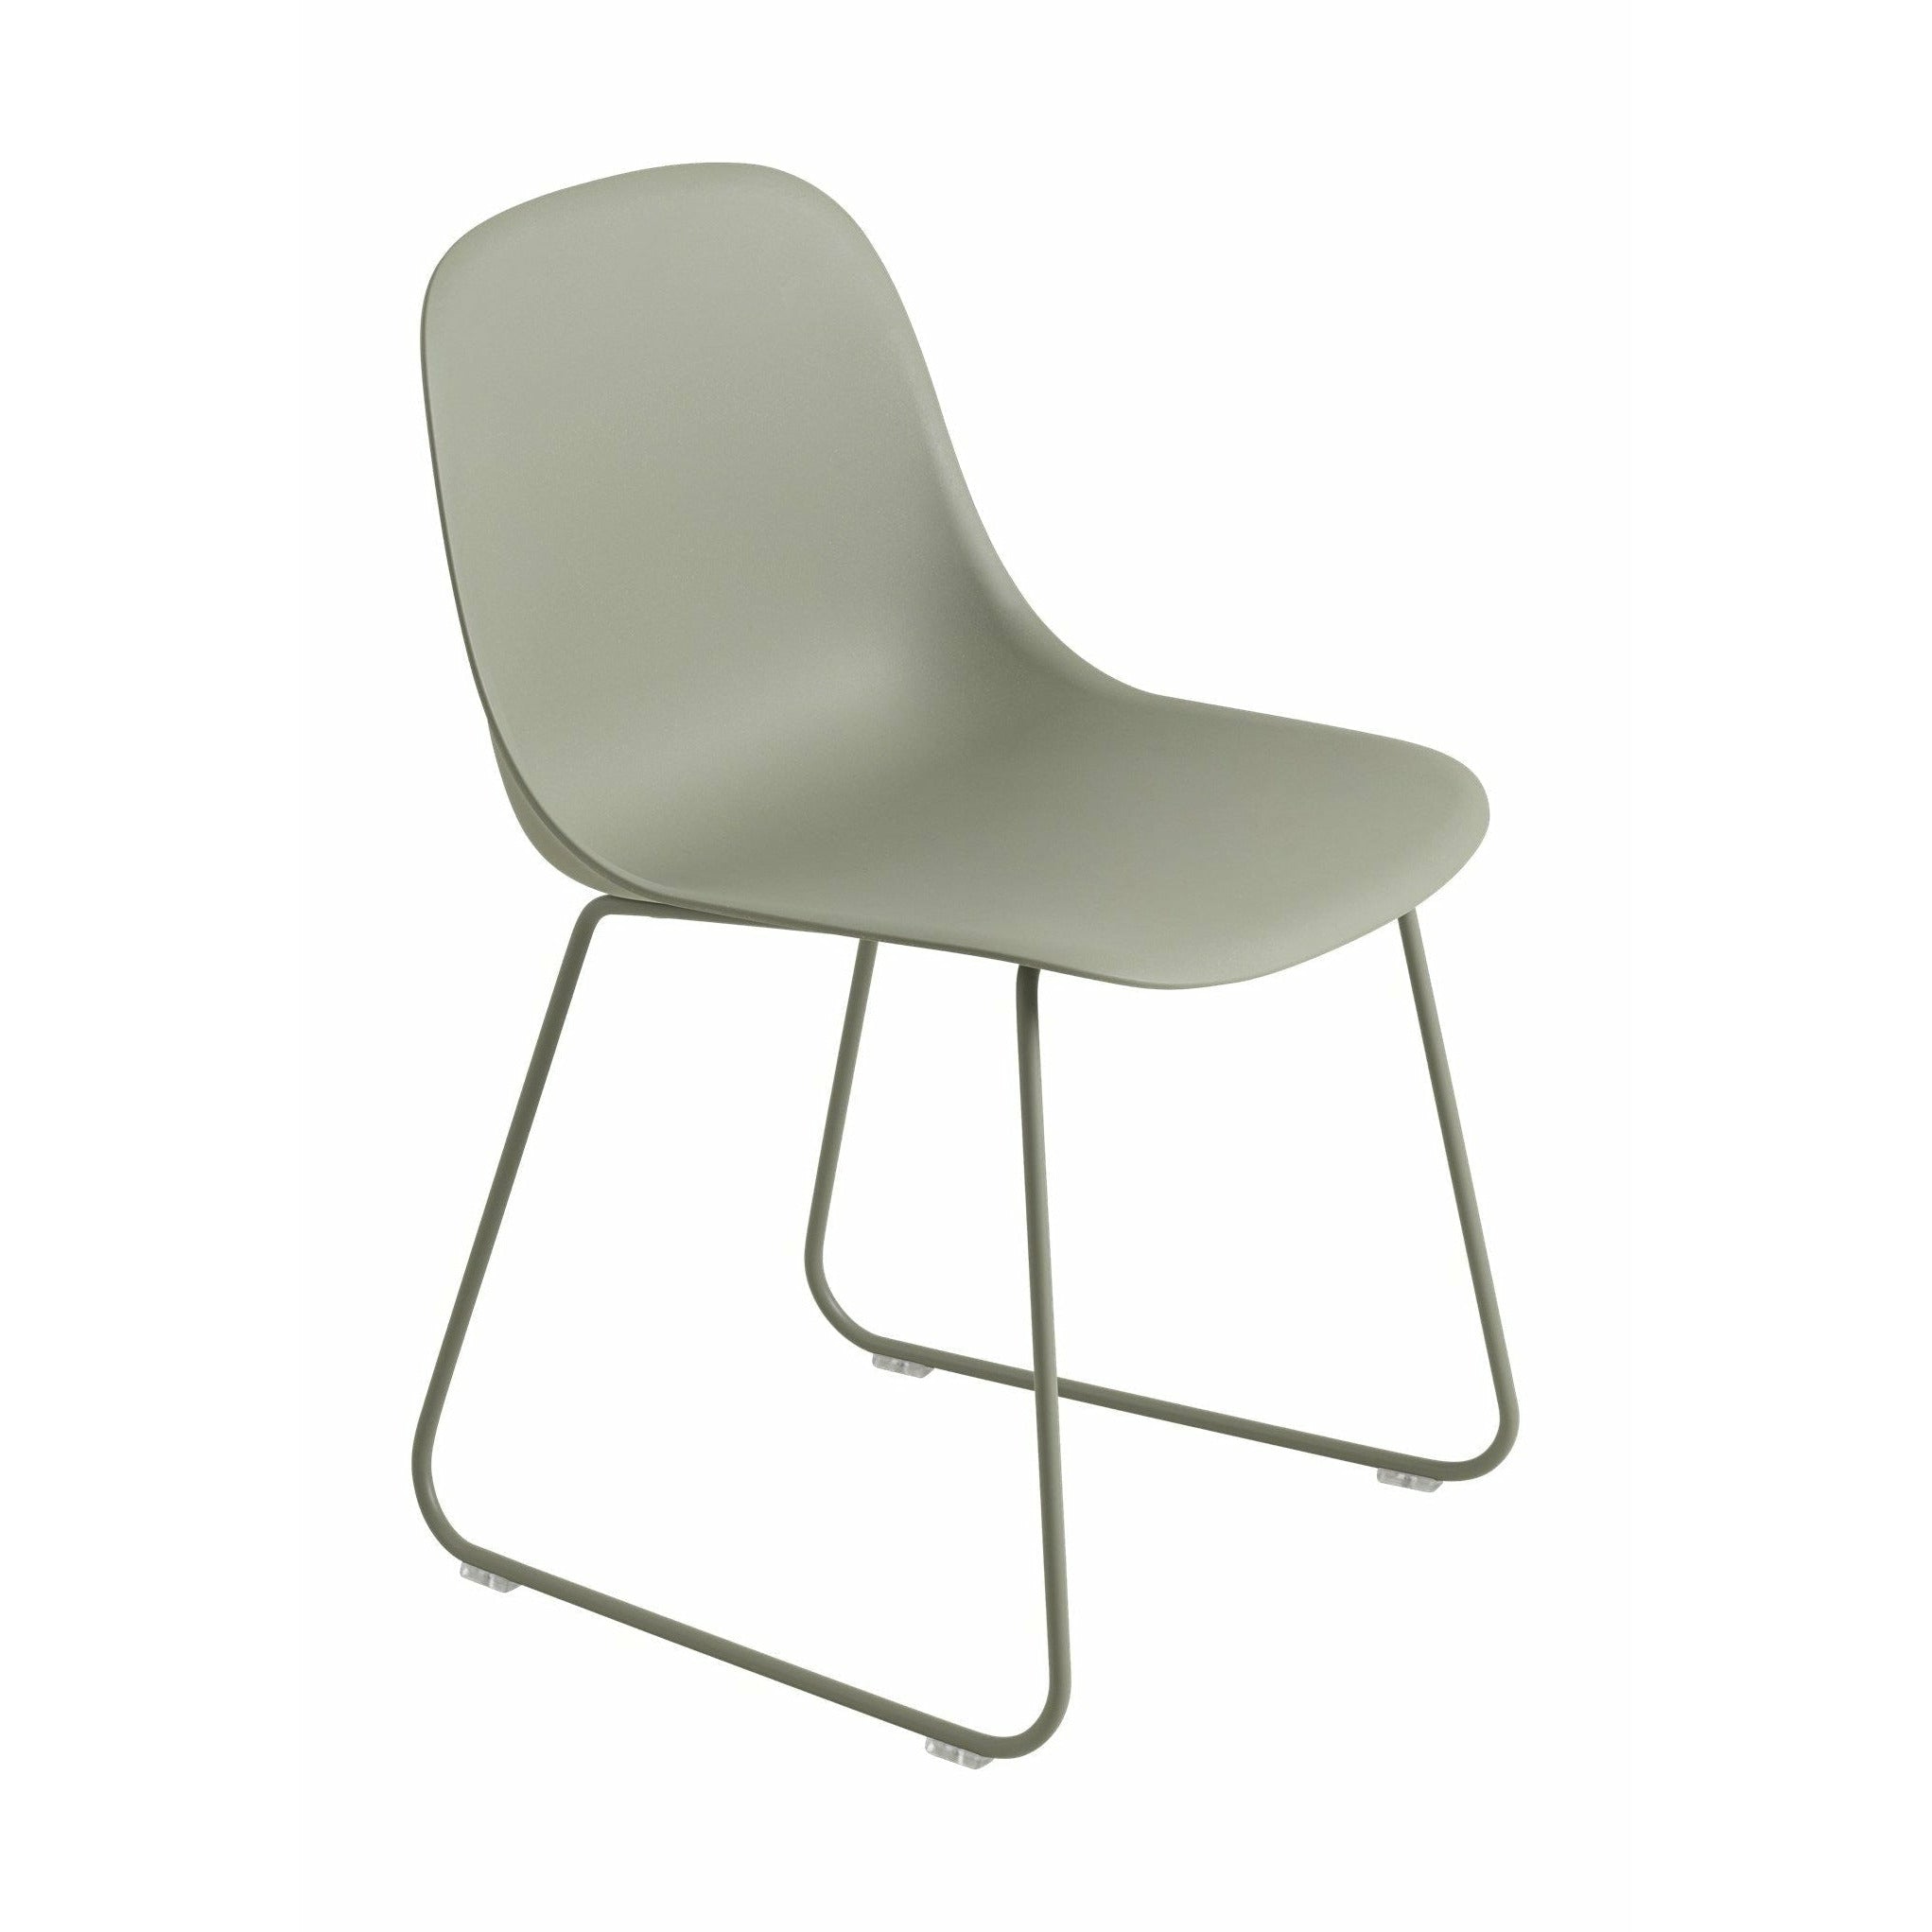 Muuto Fiber Side Chair Made Of Recycled Plastic Sled Base, Green/Green